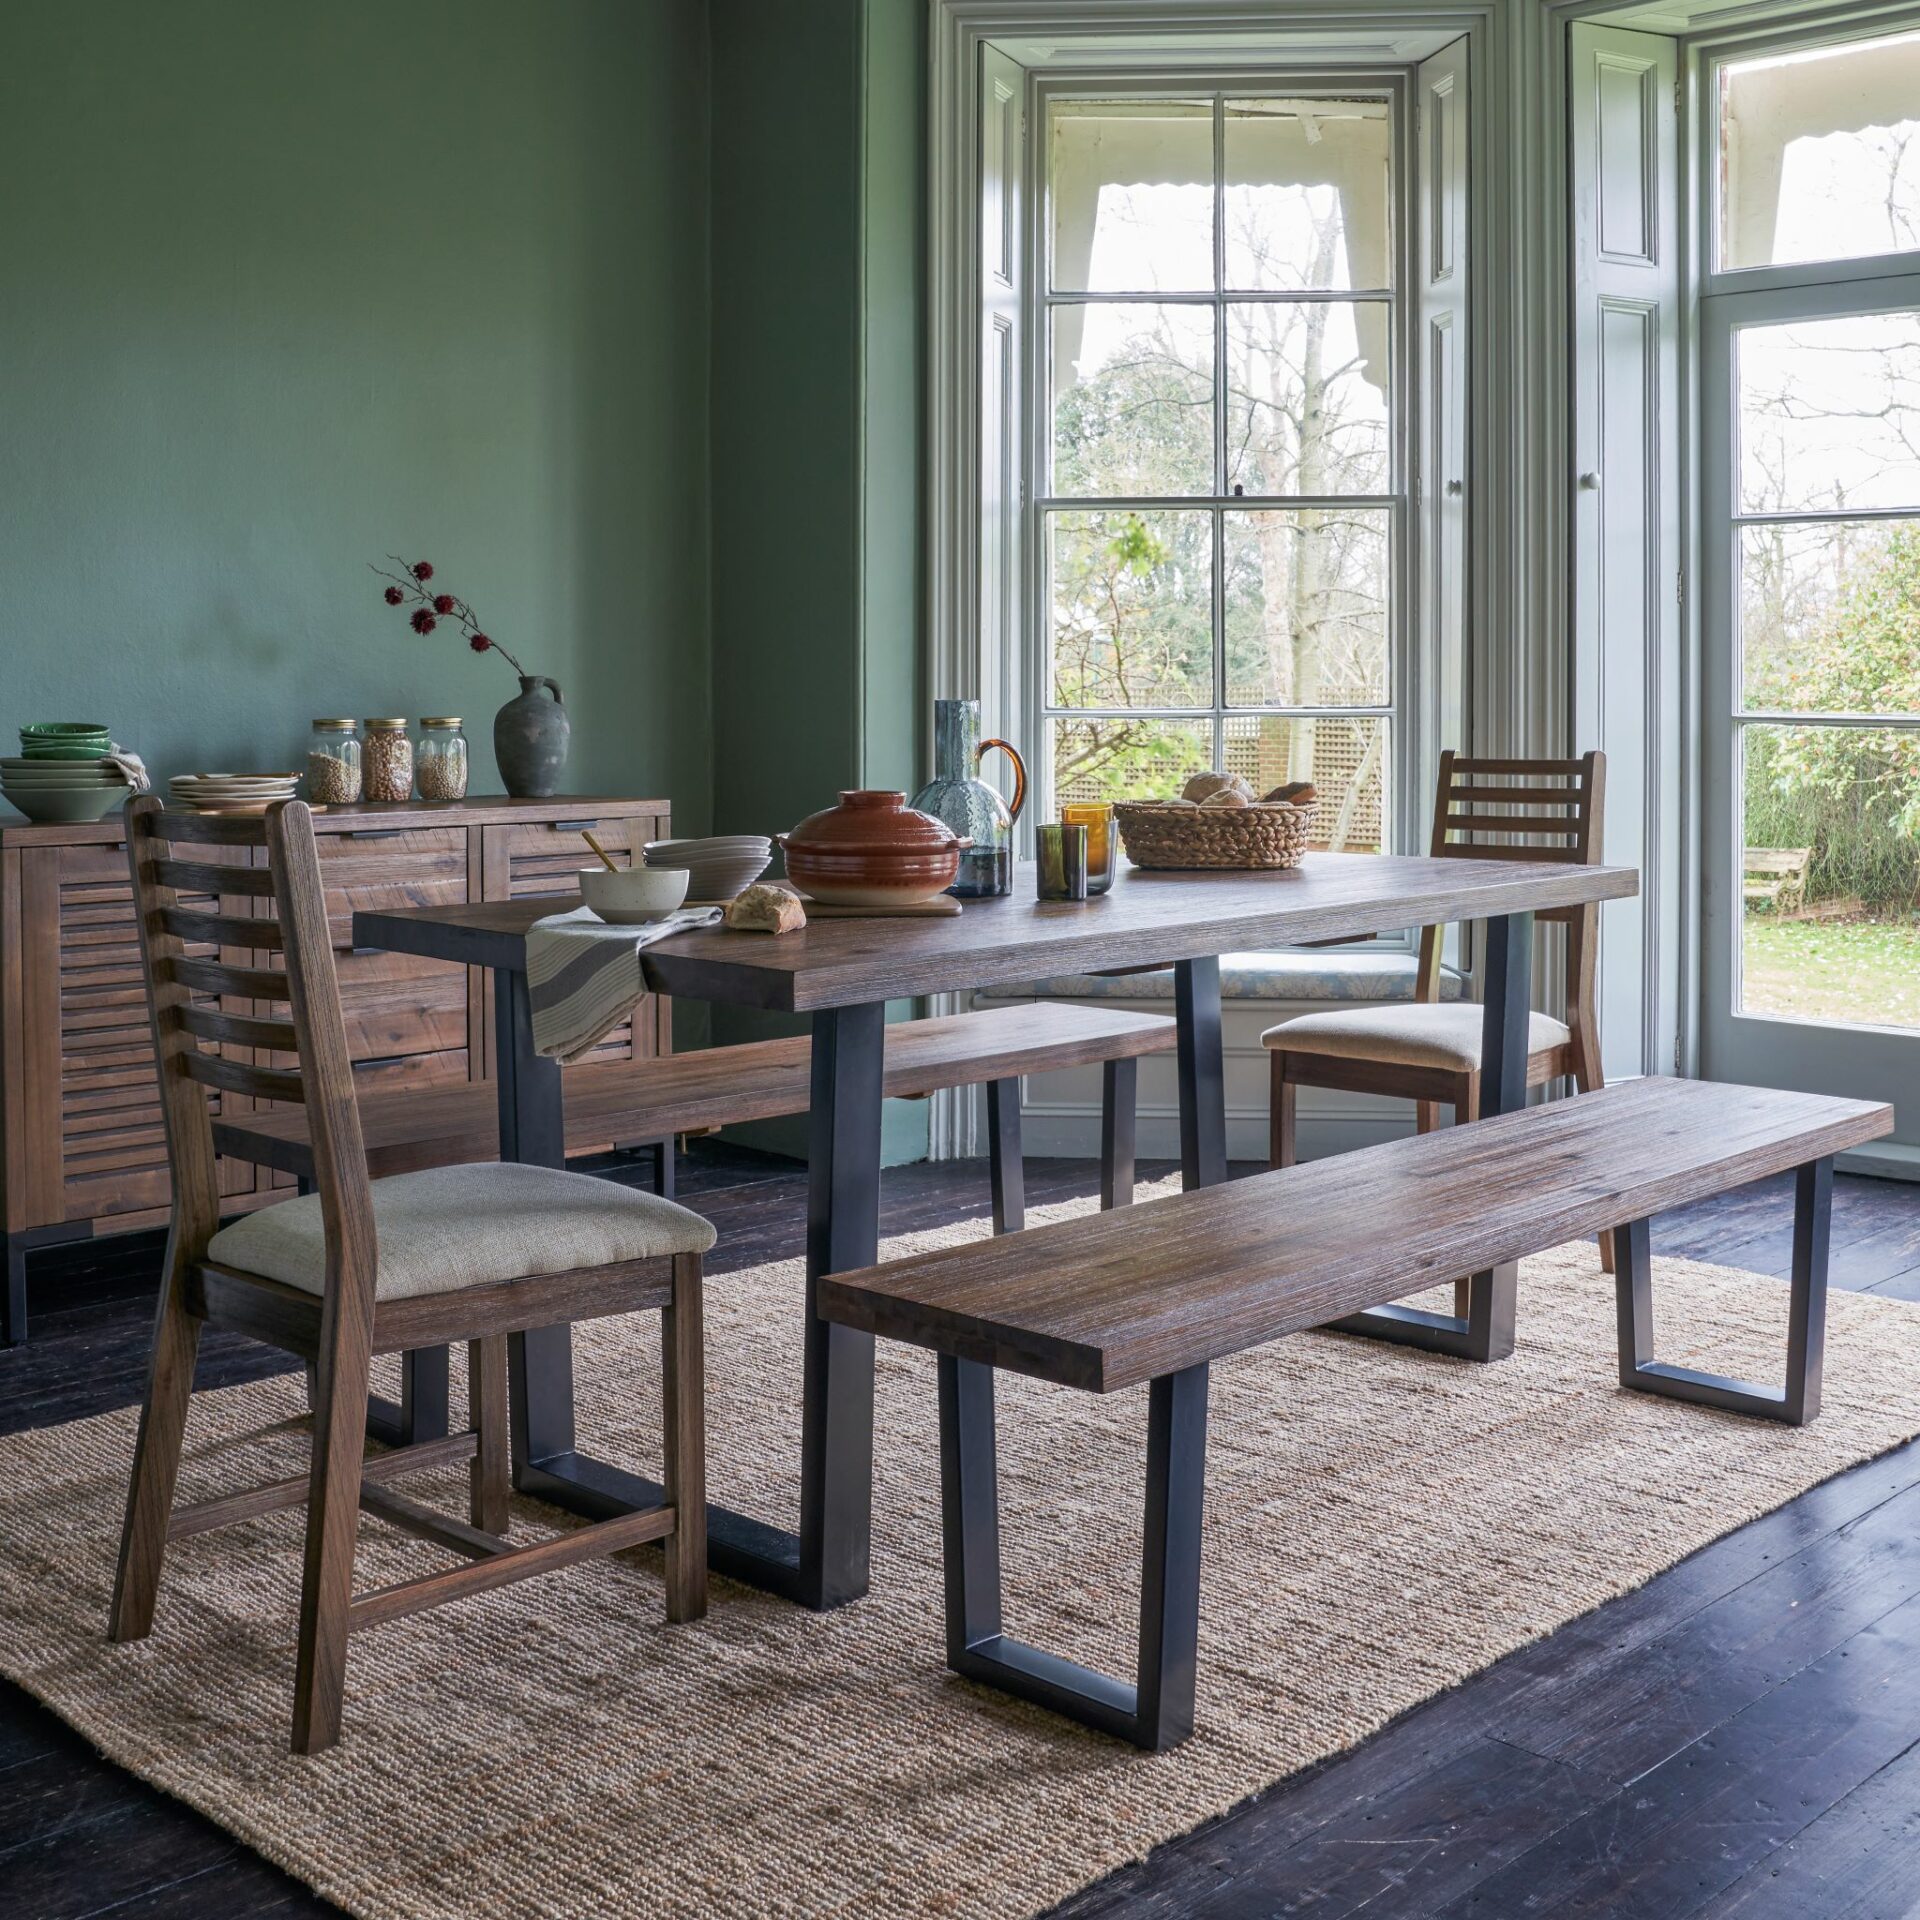 Detroit dark hardwood dining table with chairs and bench in light and airy dining room with green walls.